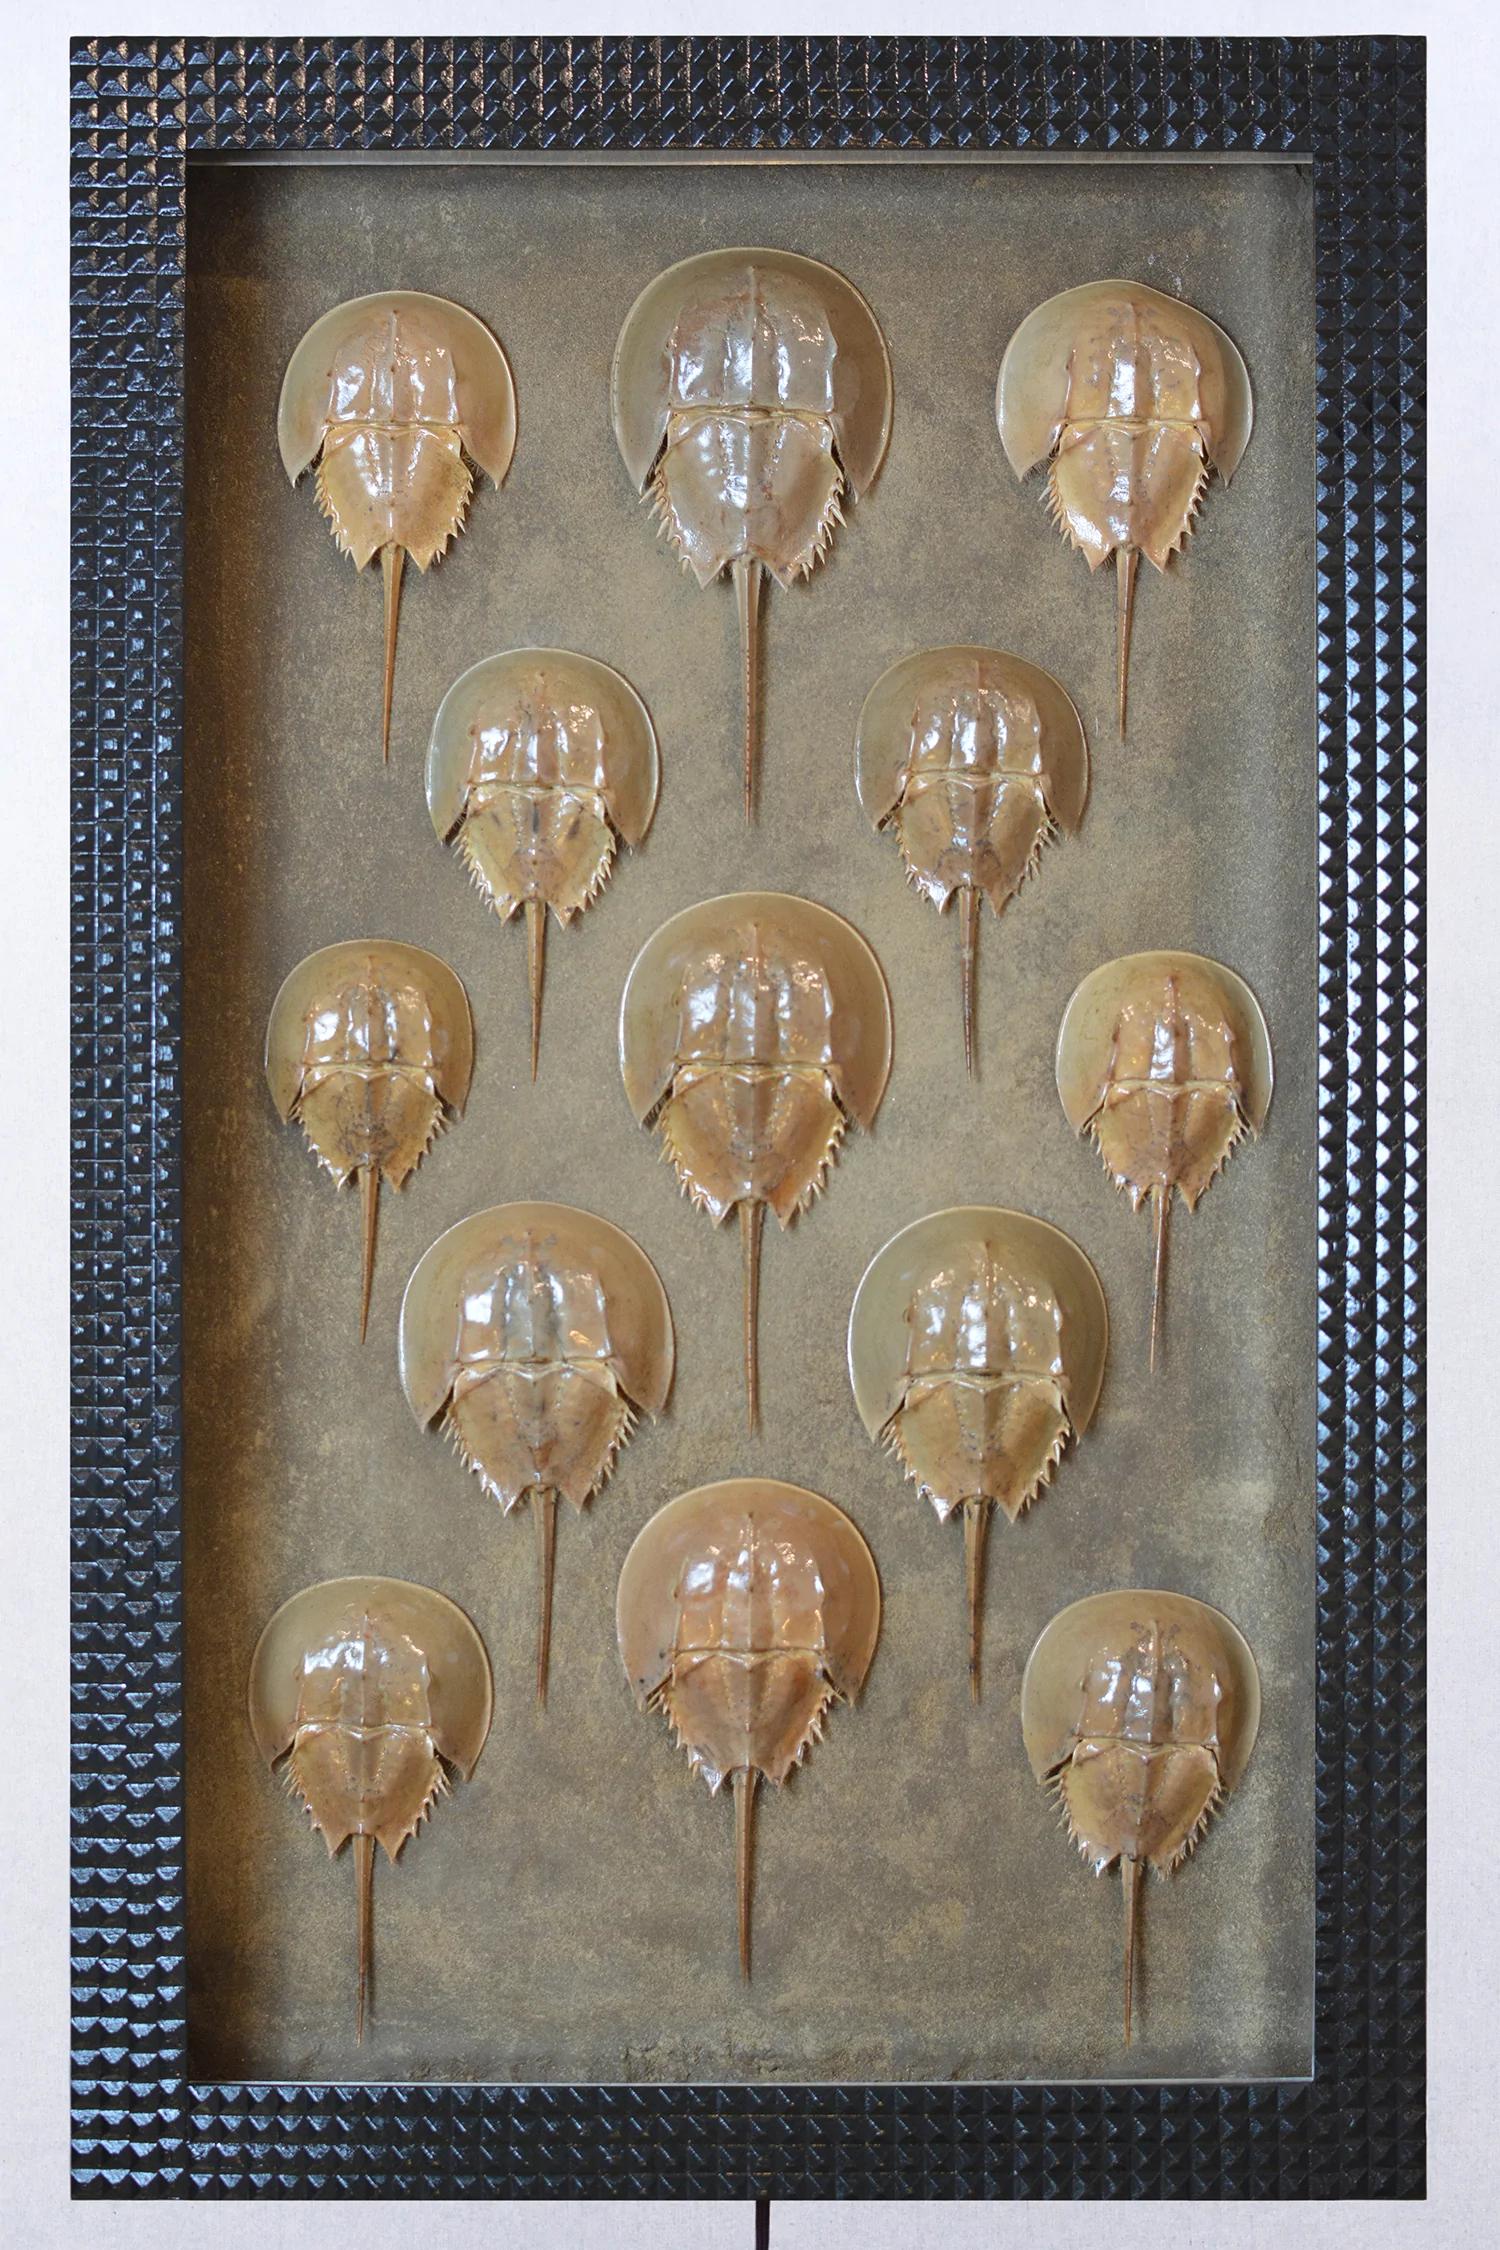 Drones, 2022, is a techno-futuristic riff on the traditional Victorian shadowbox containing horseshoe crab carapaces collected by hand on a visit to Cape Cod.

Original artwork by Christopher Tennant. Edition of 3. 

In stock and ready to